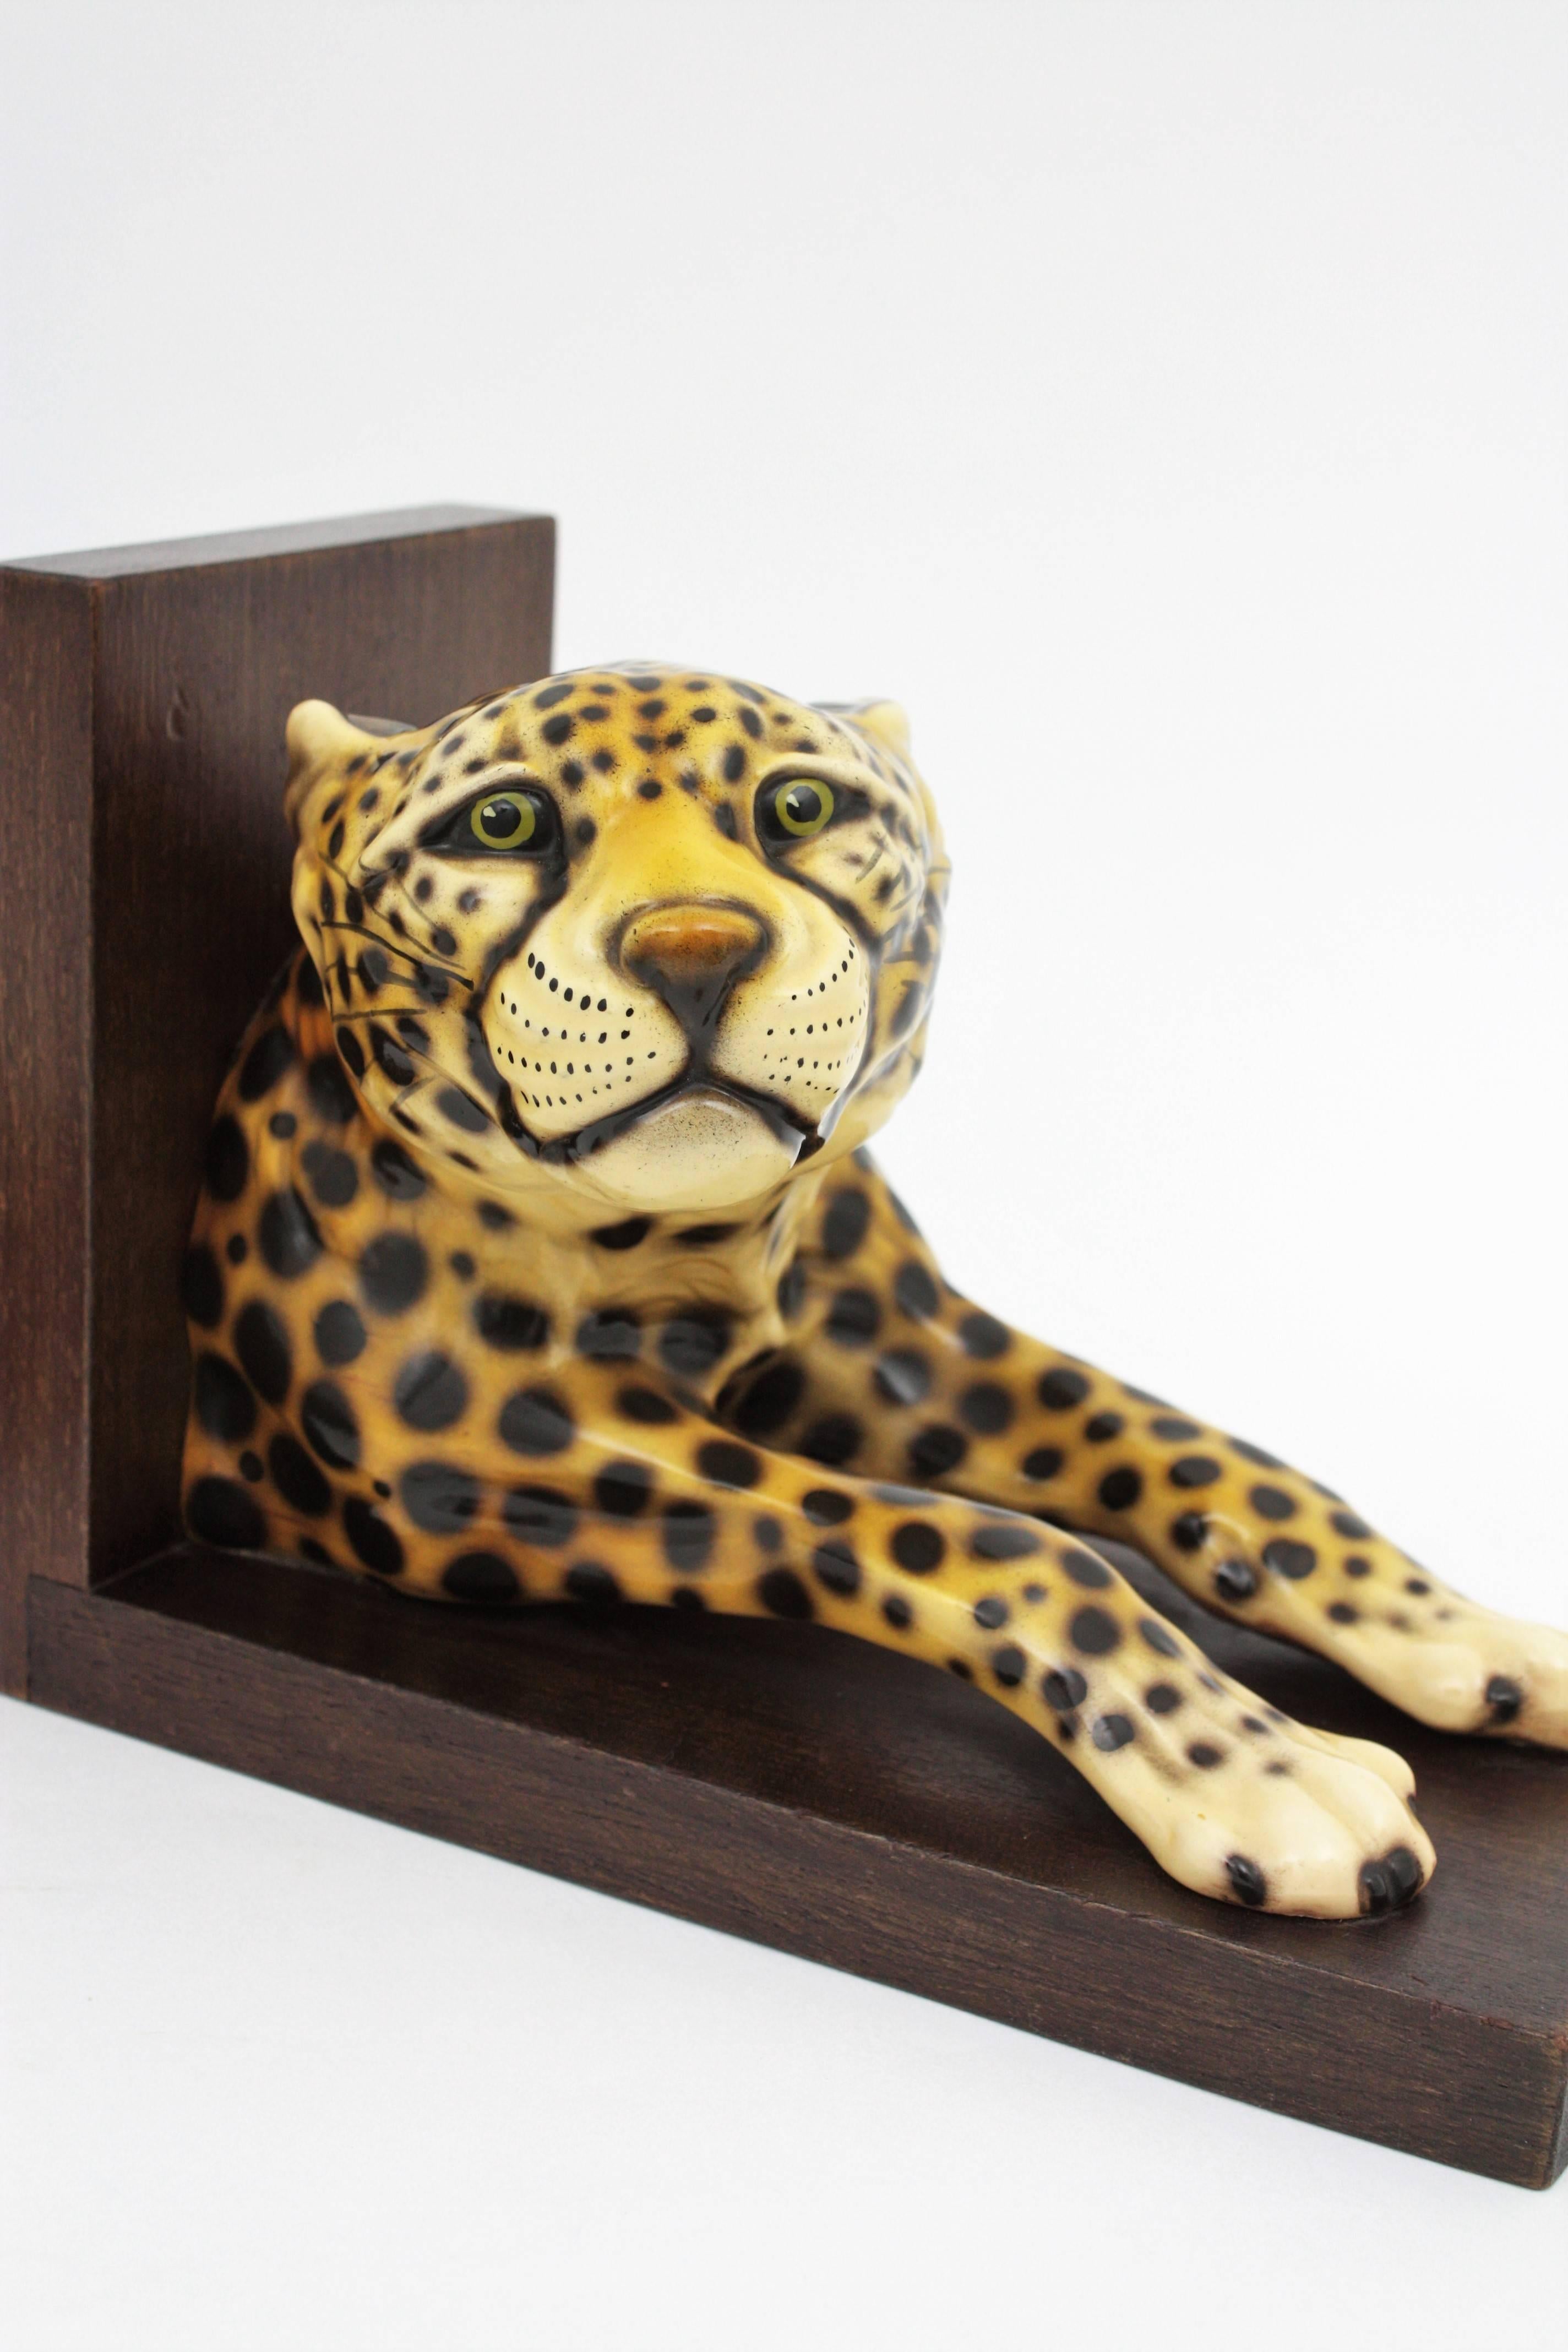 20th Century Italian Hollywood Regency Cheetah Ceramic Bookends, Set of Two